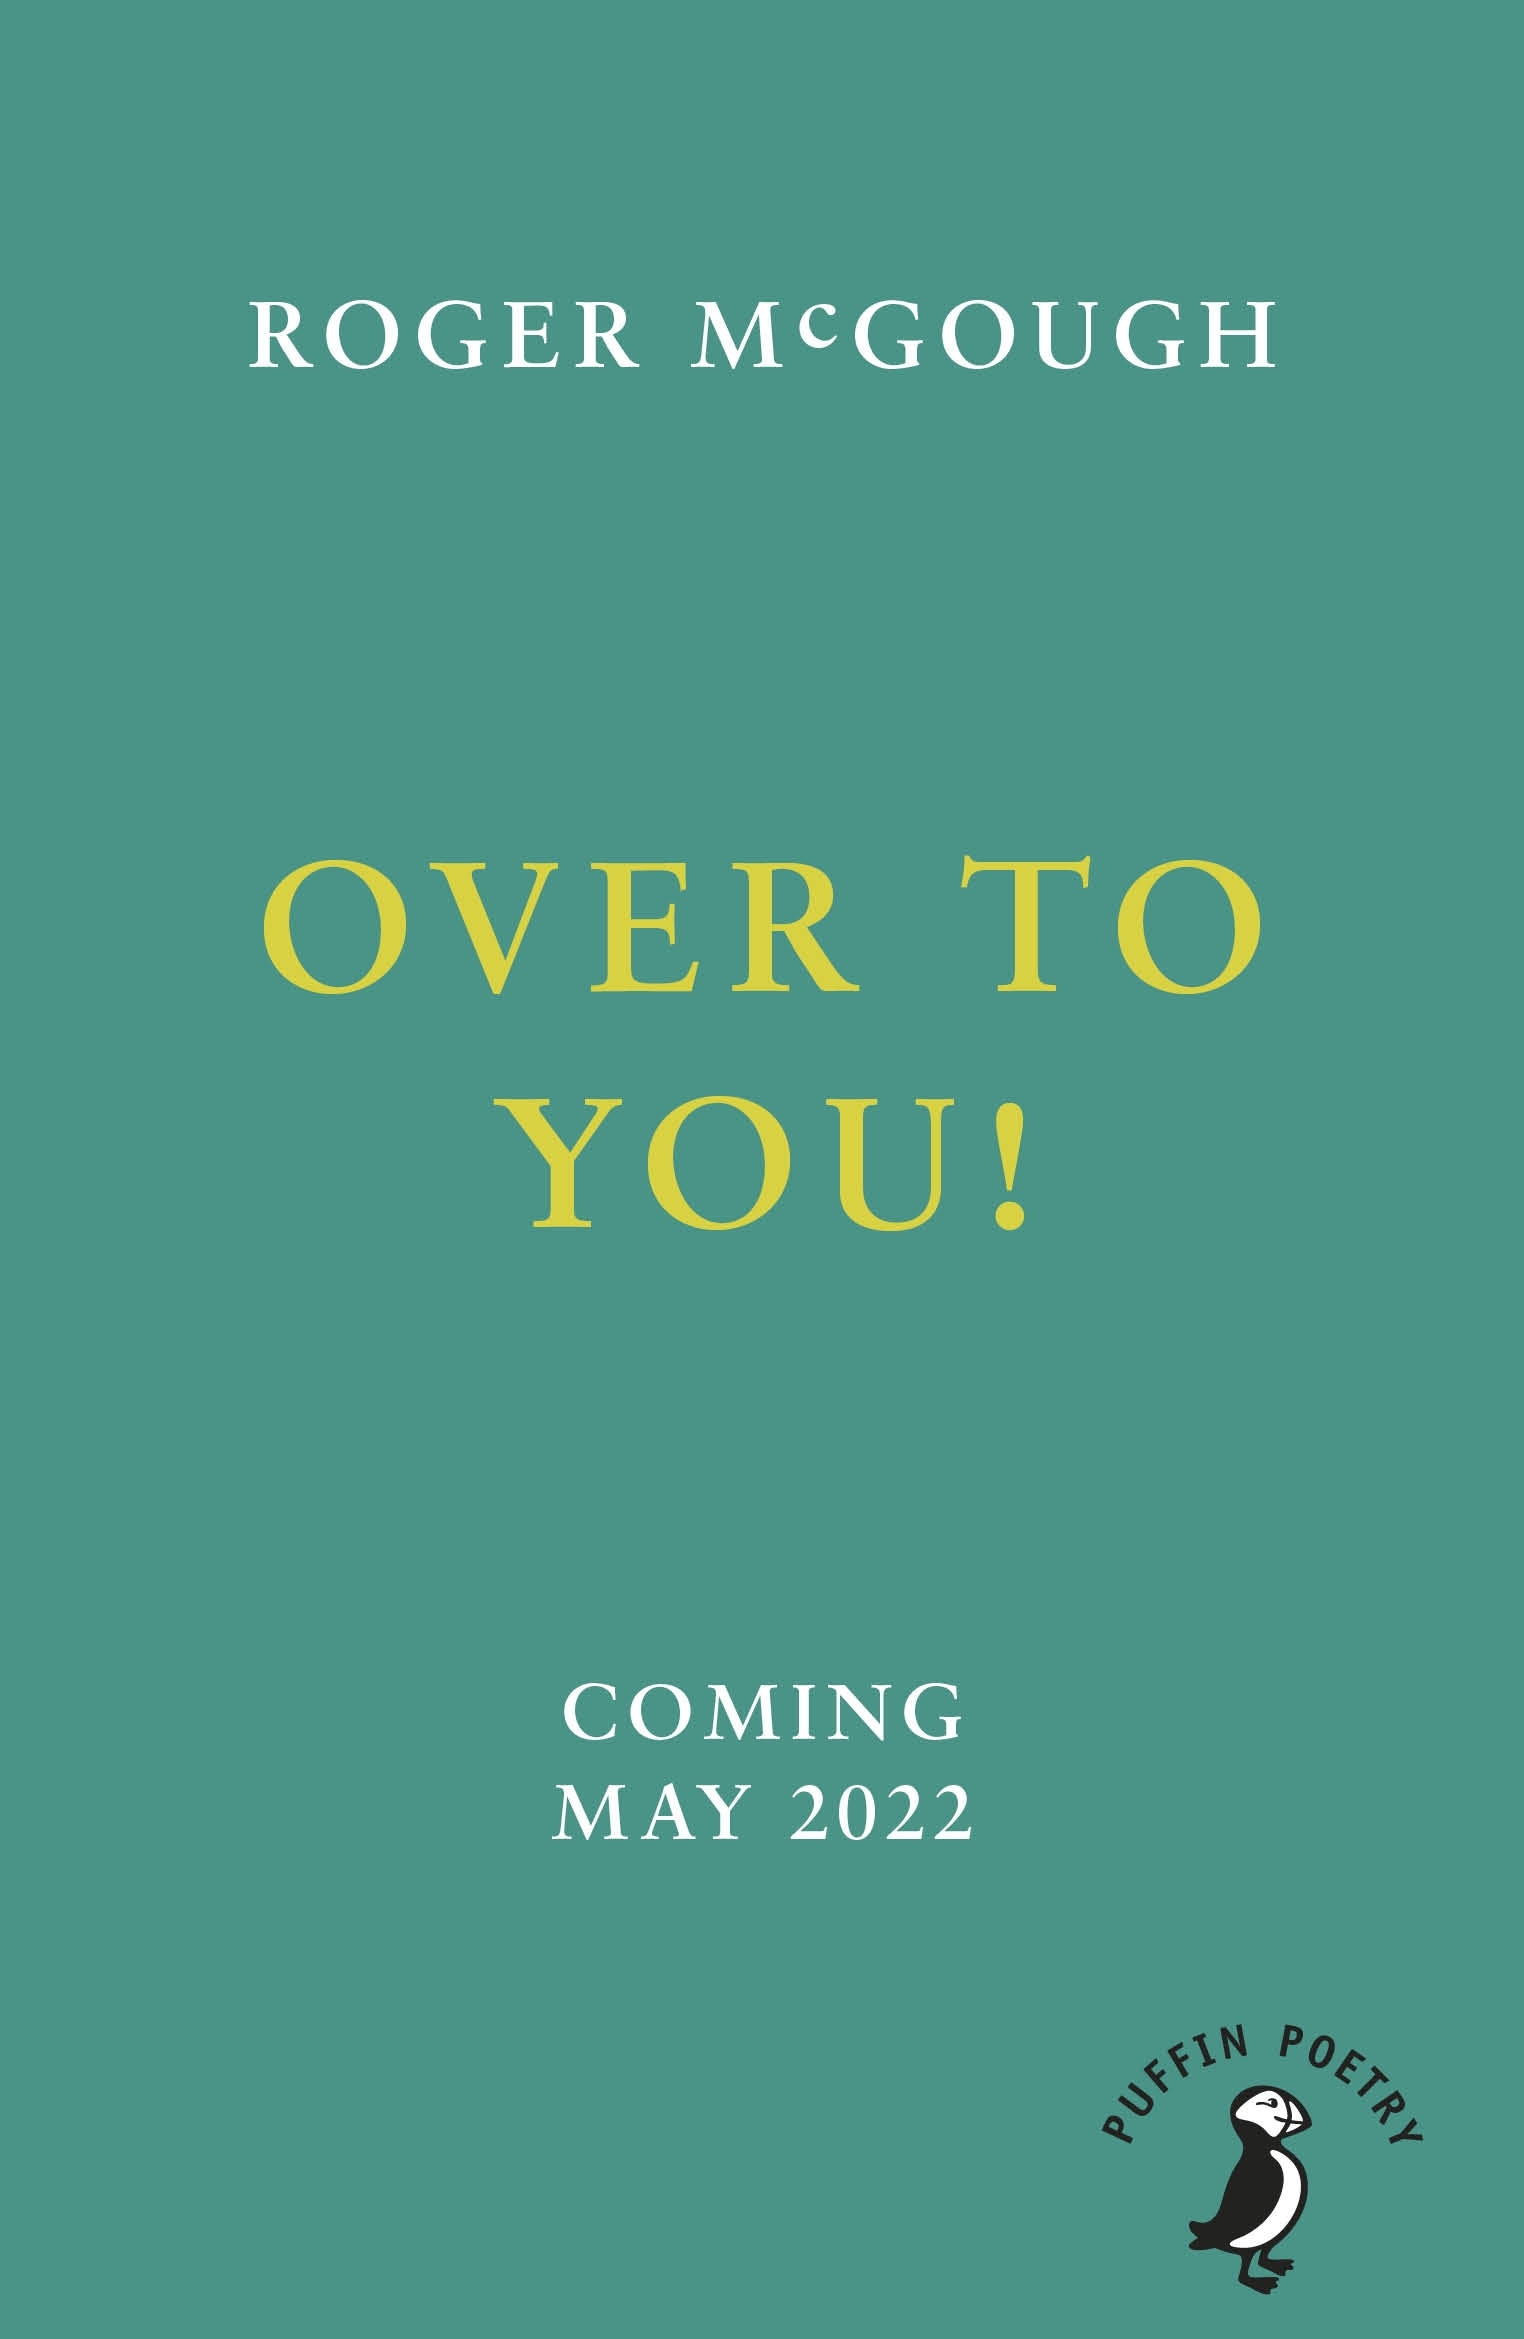 Book “Over to You!” by Roger McGough — May 5, 2022